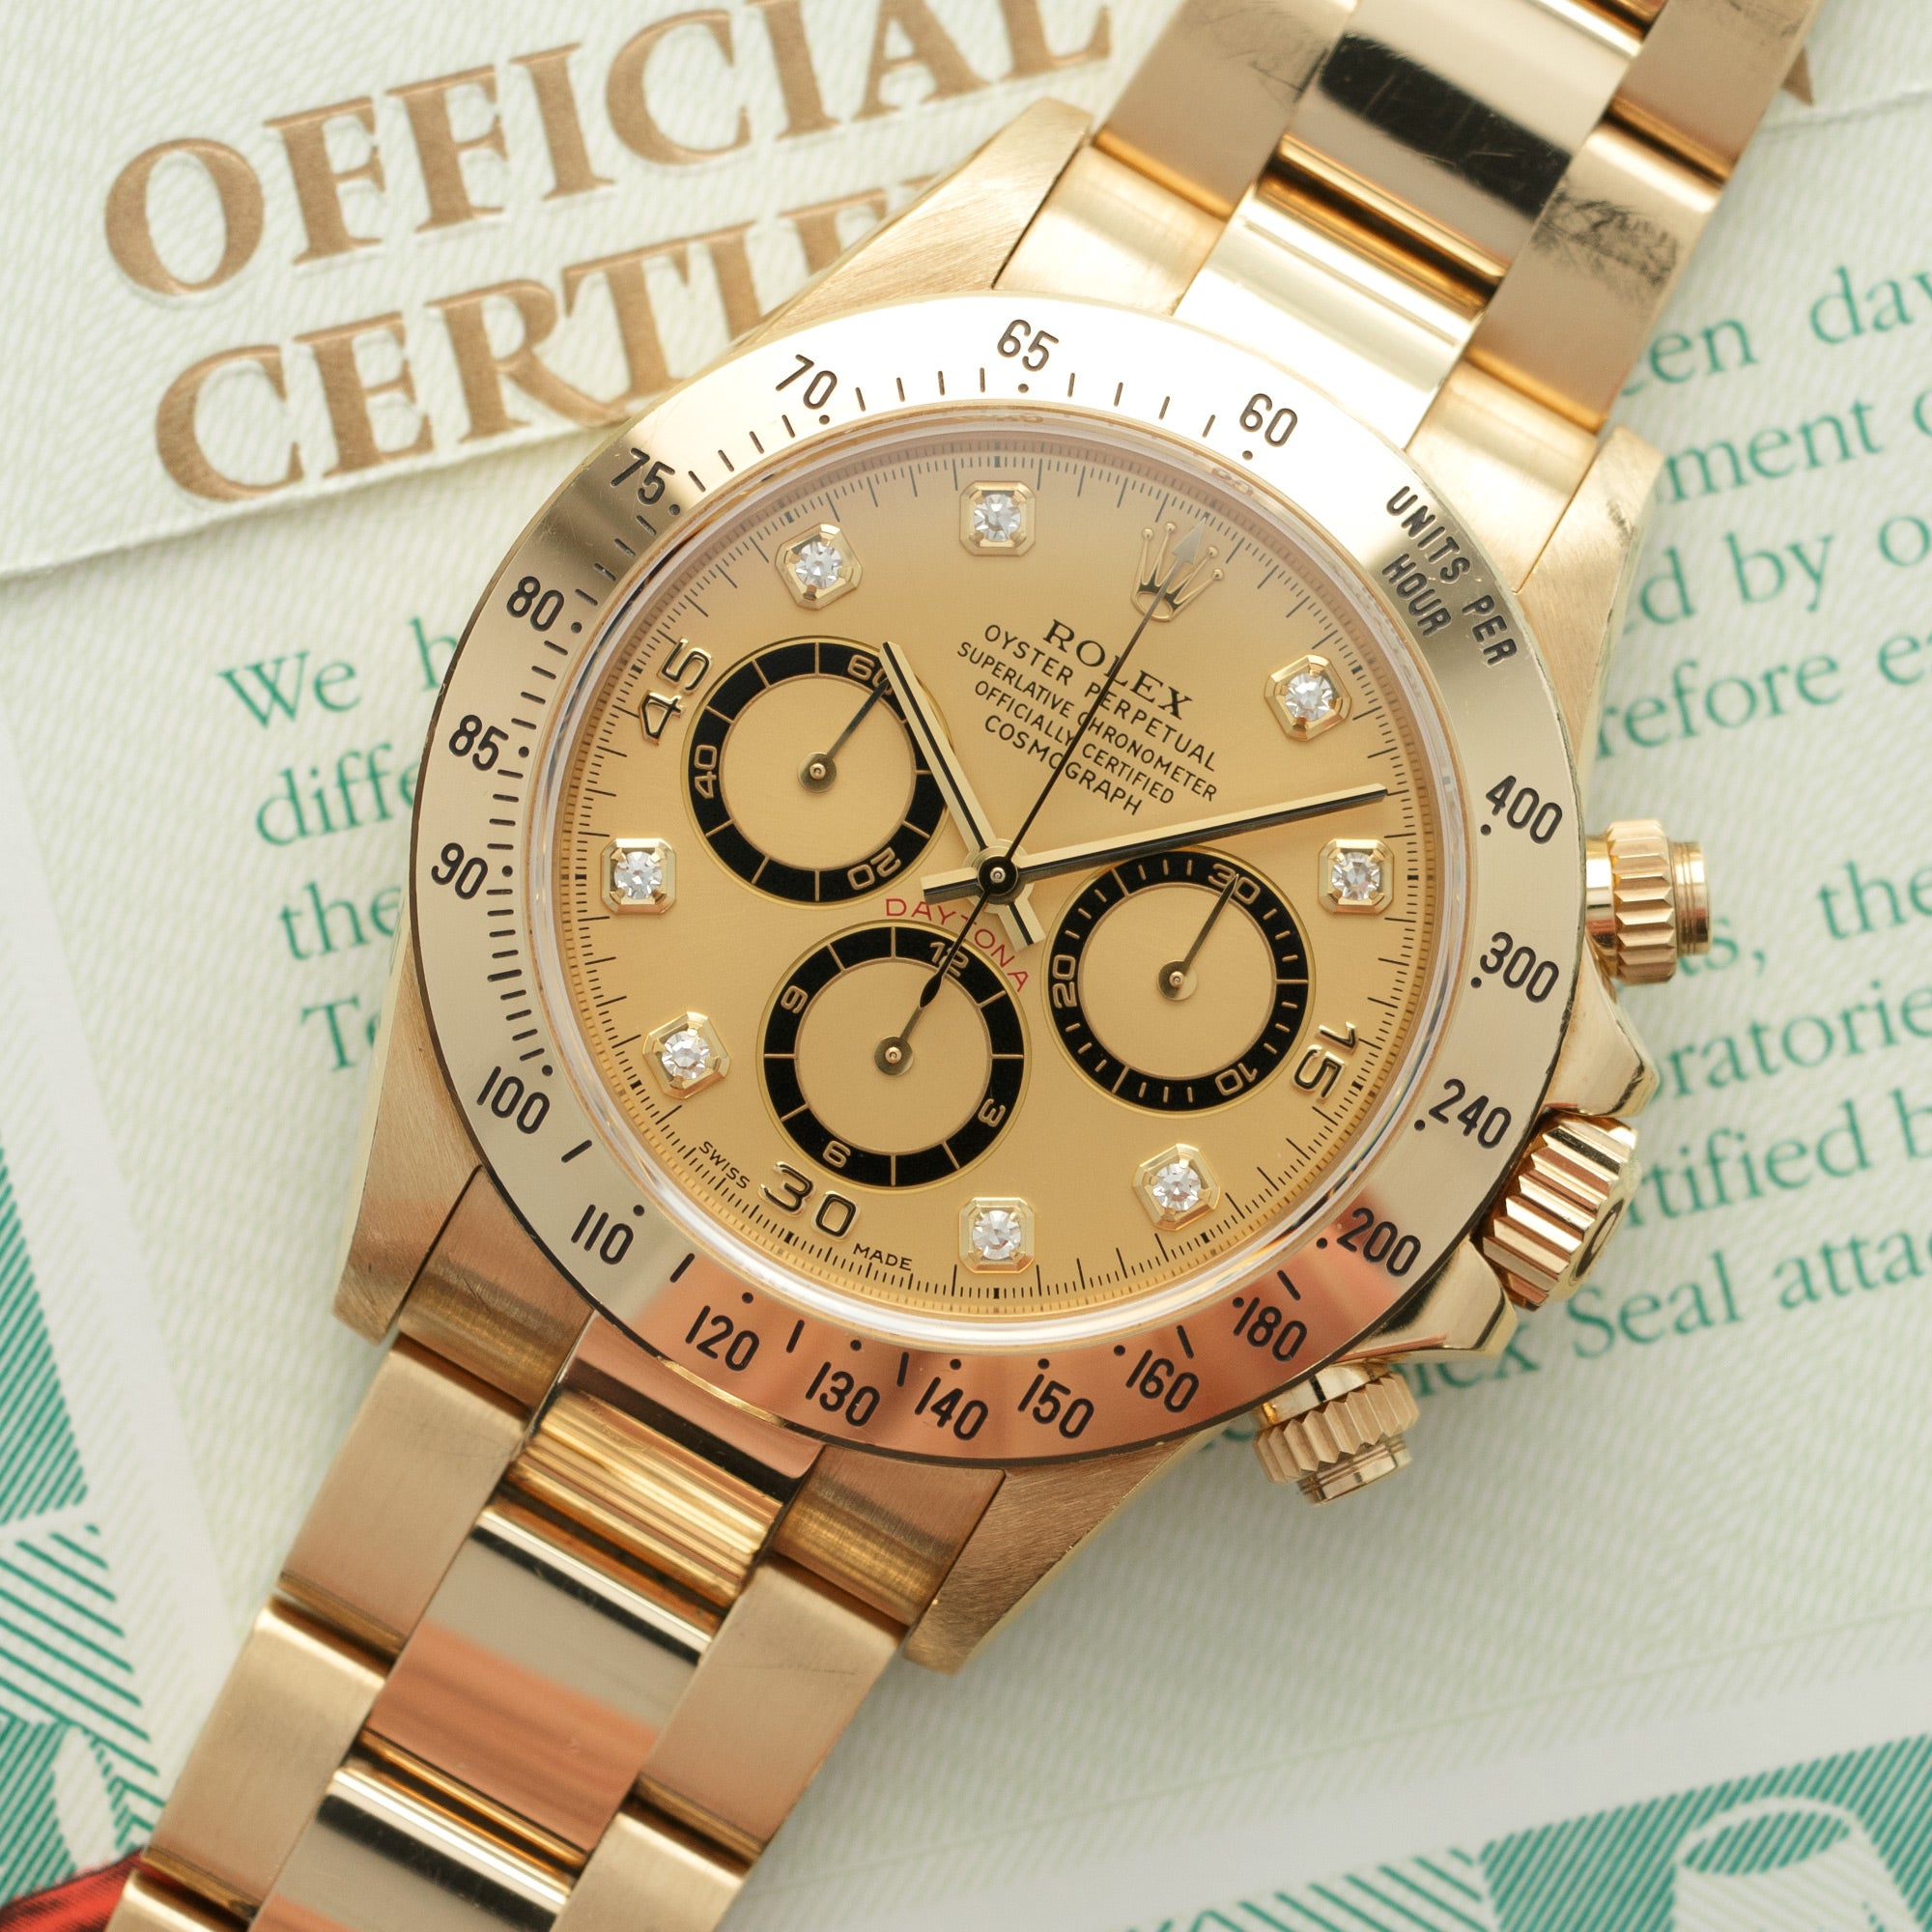 Rolex Yellow Gold Cosmograph Daytona Zenith Watch Ref. 16528 with Original Box and Papers